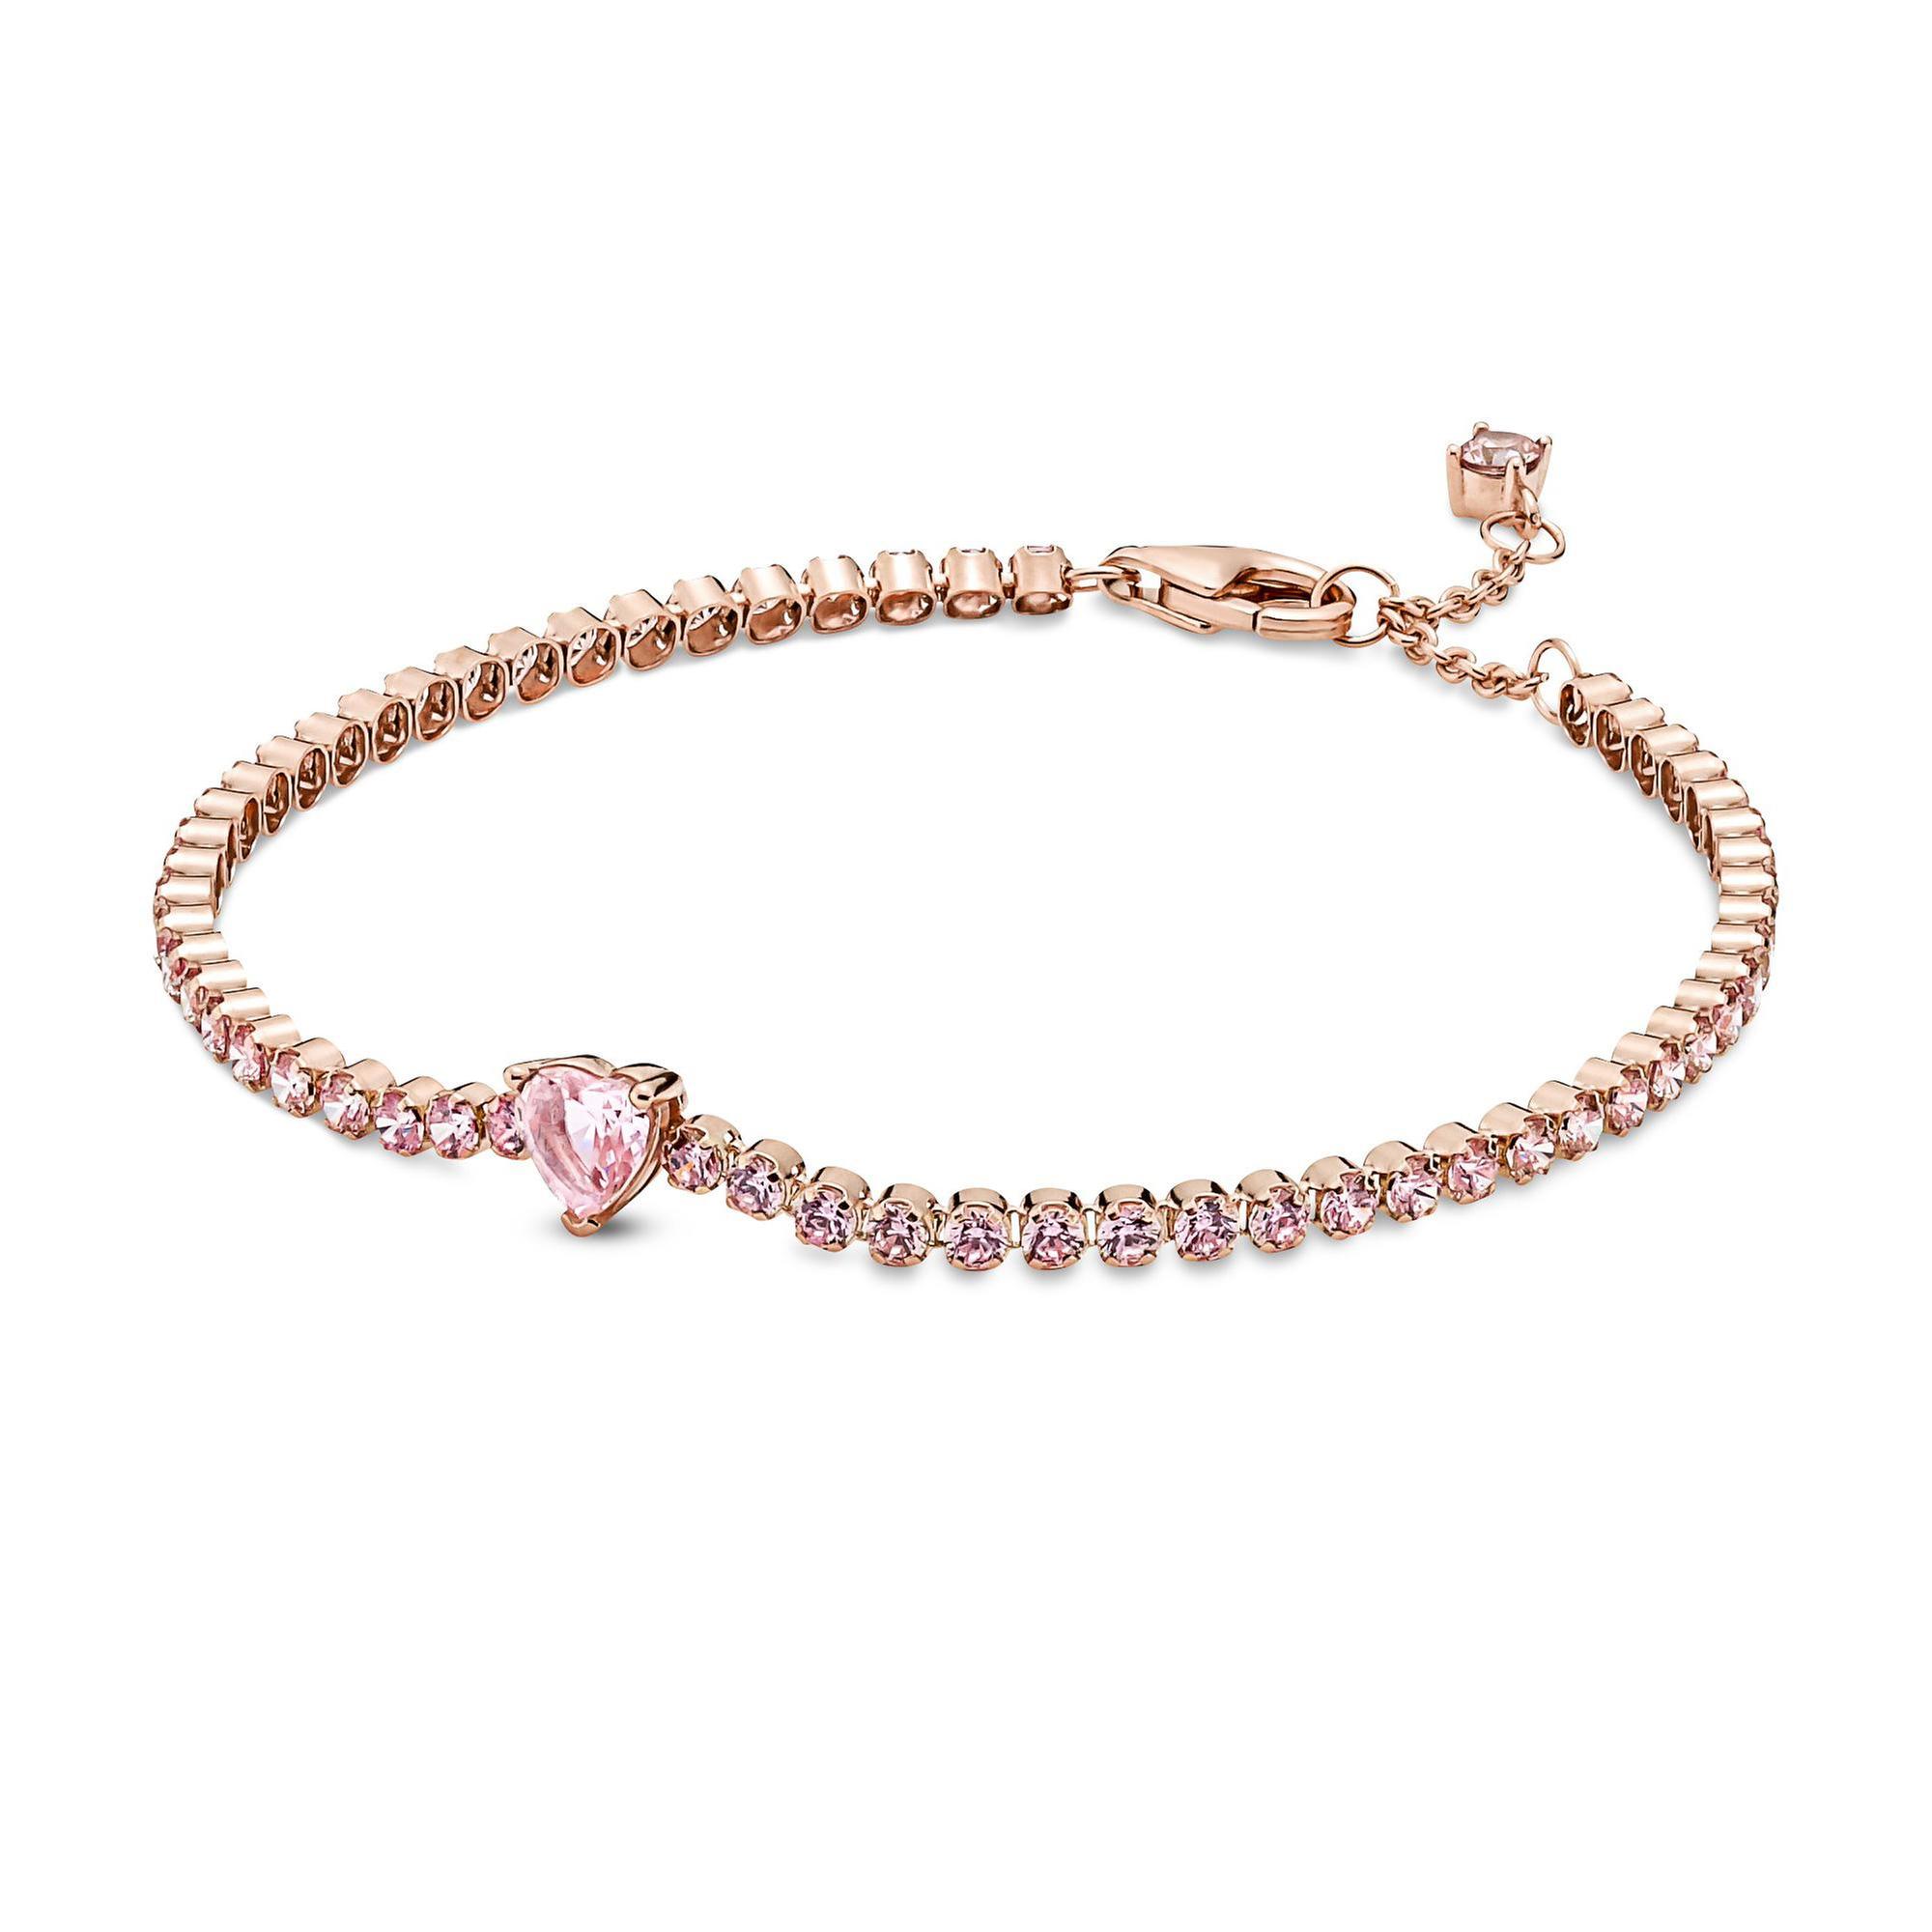 Pandora Sparkling Heart Tennis Bracelet, Rose Gold-Plated - 7.8 inches